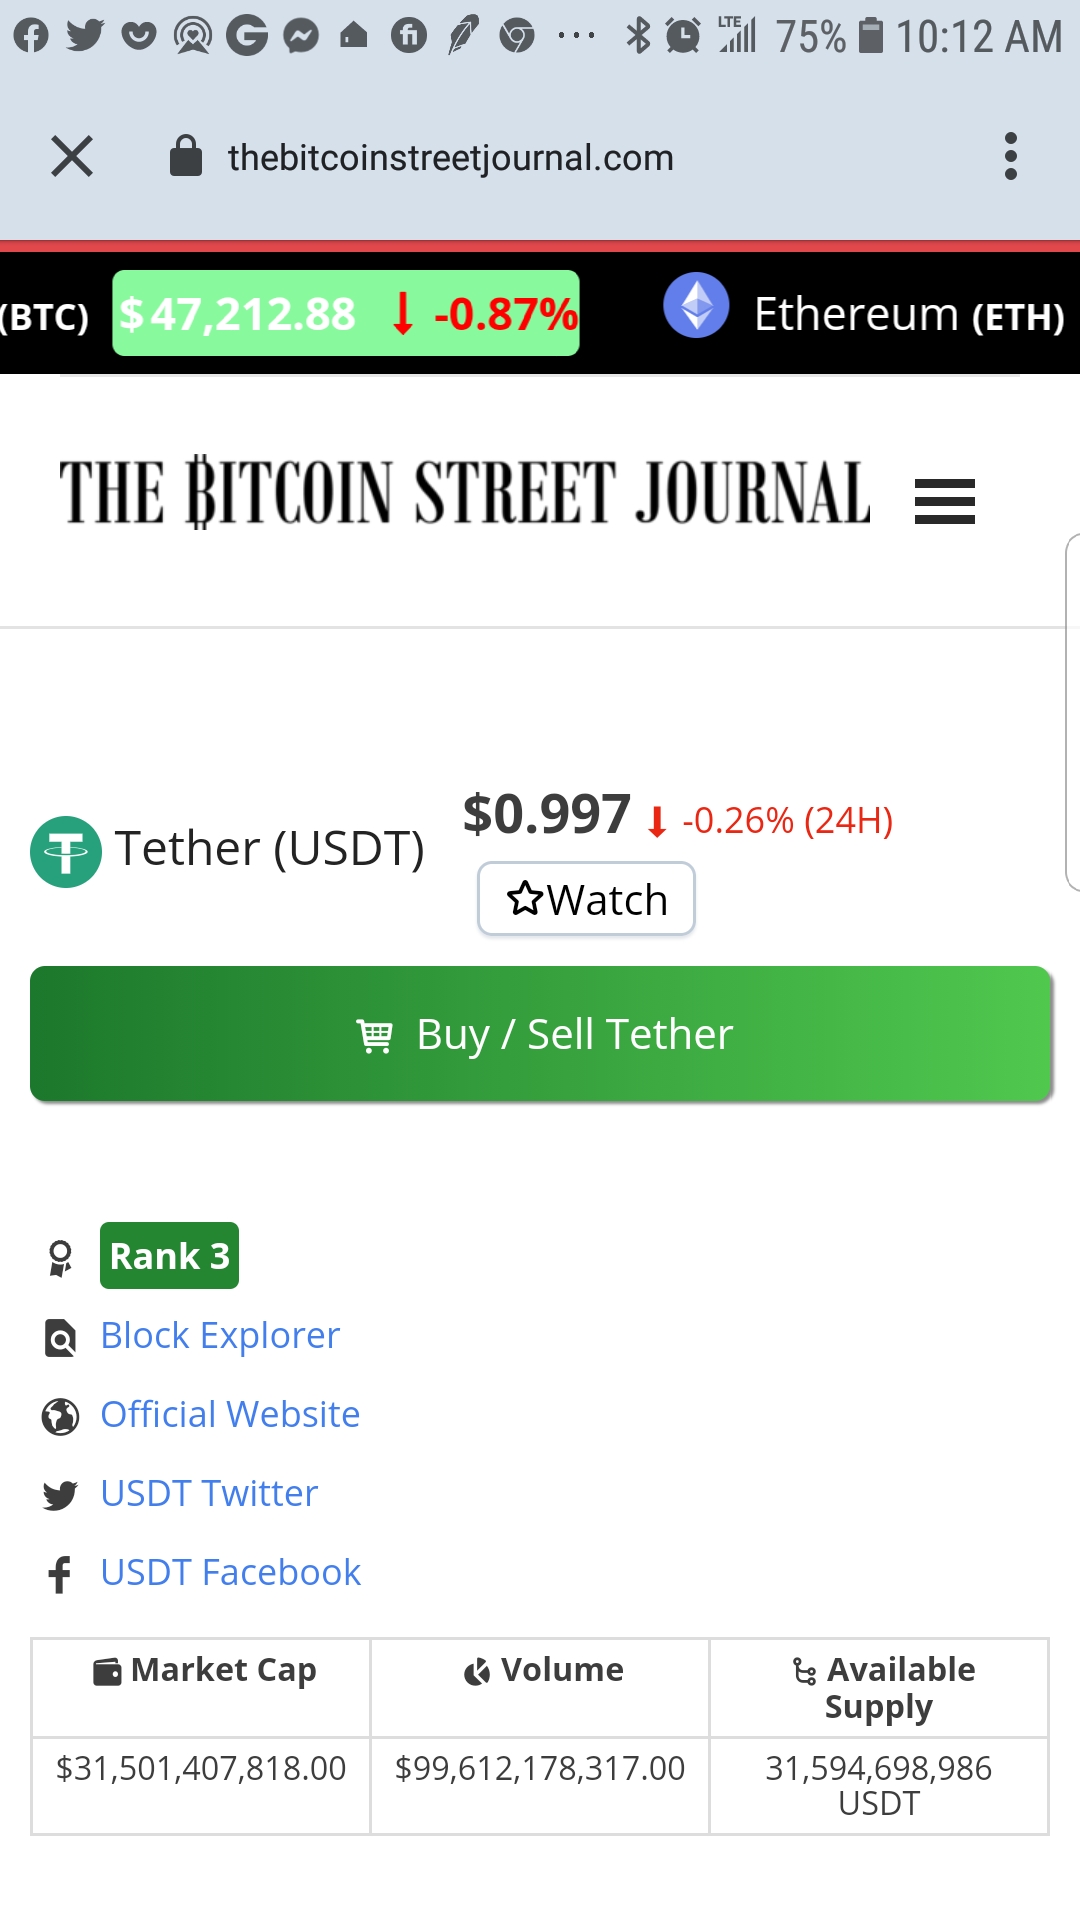 The Bitcoin Street Journal | Crypto Price And Ranks | Android App Review | GiveMeApps